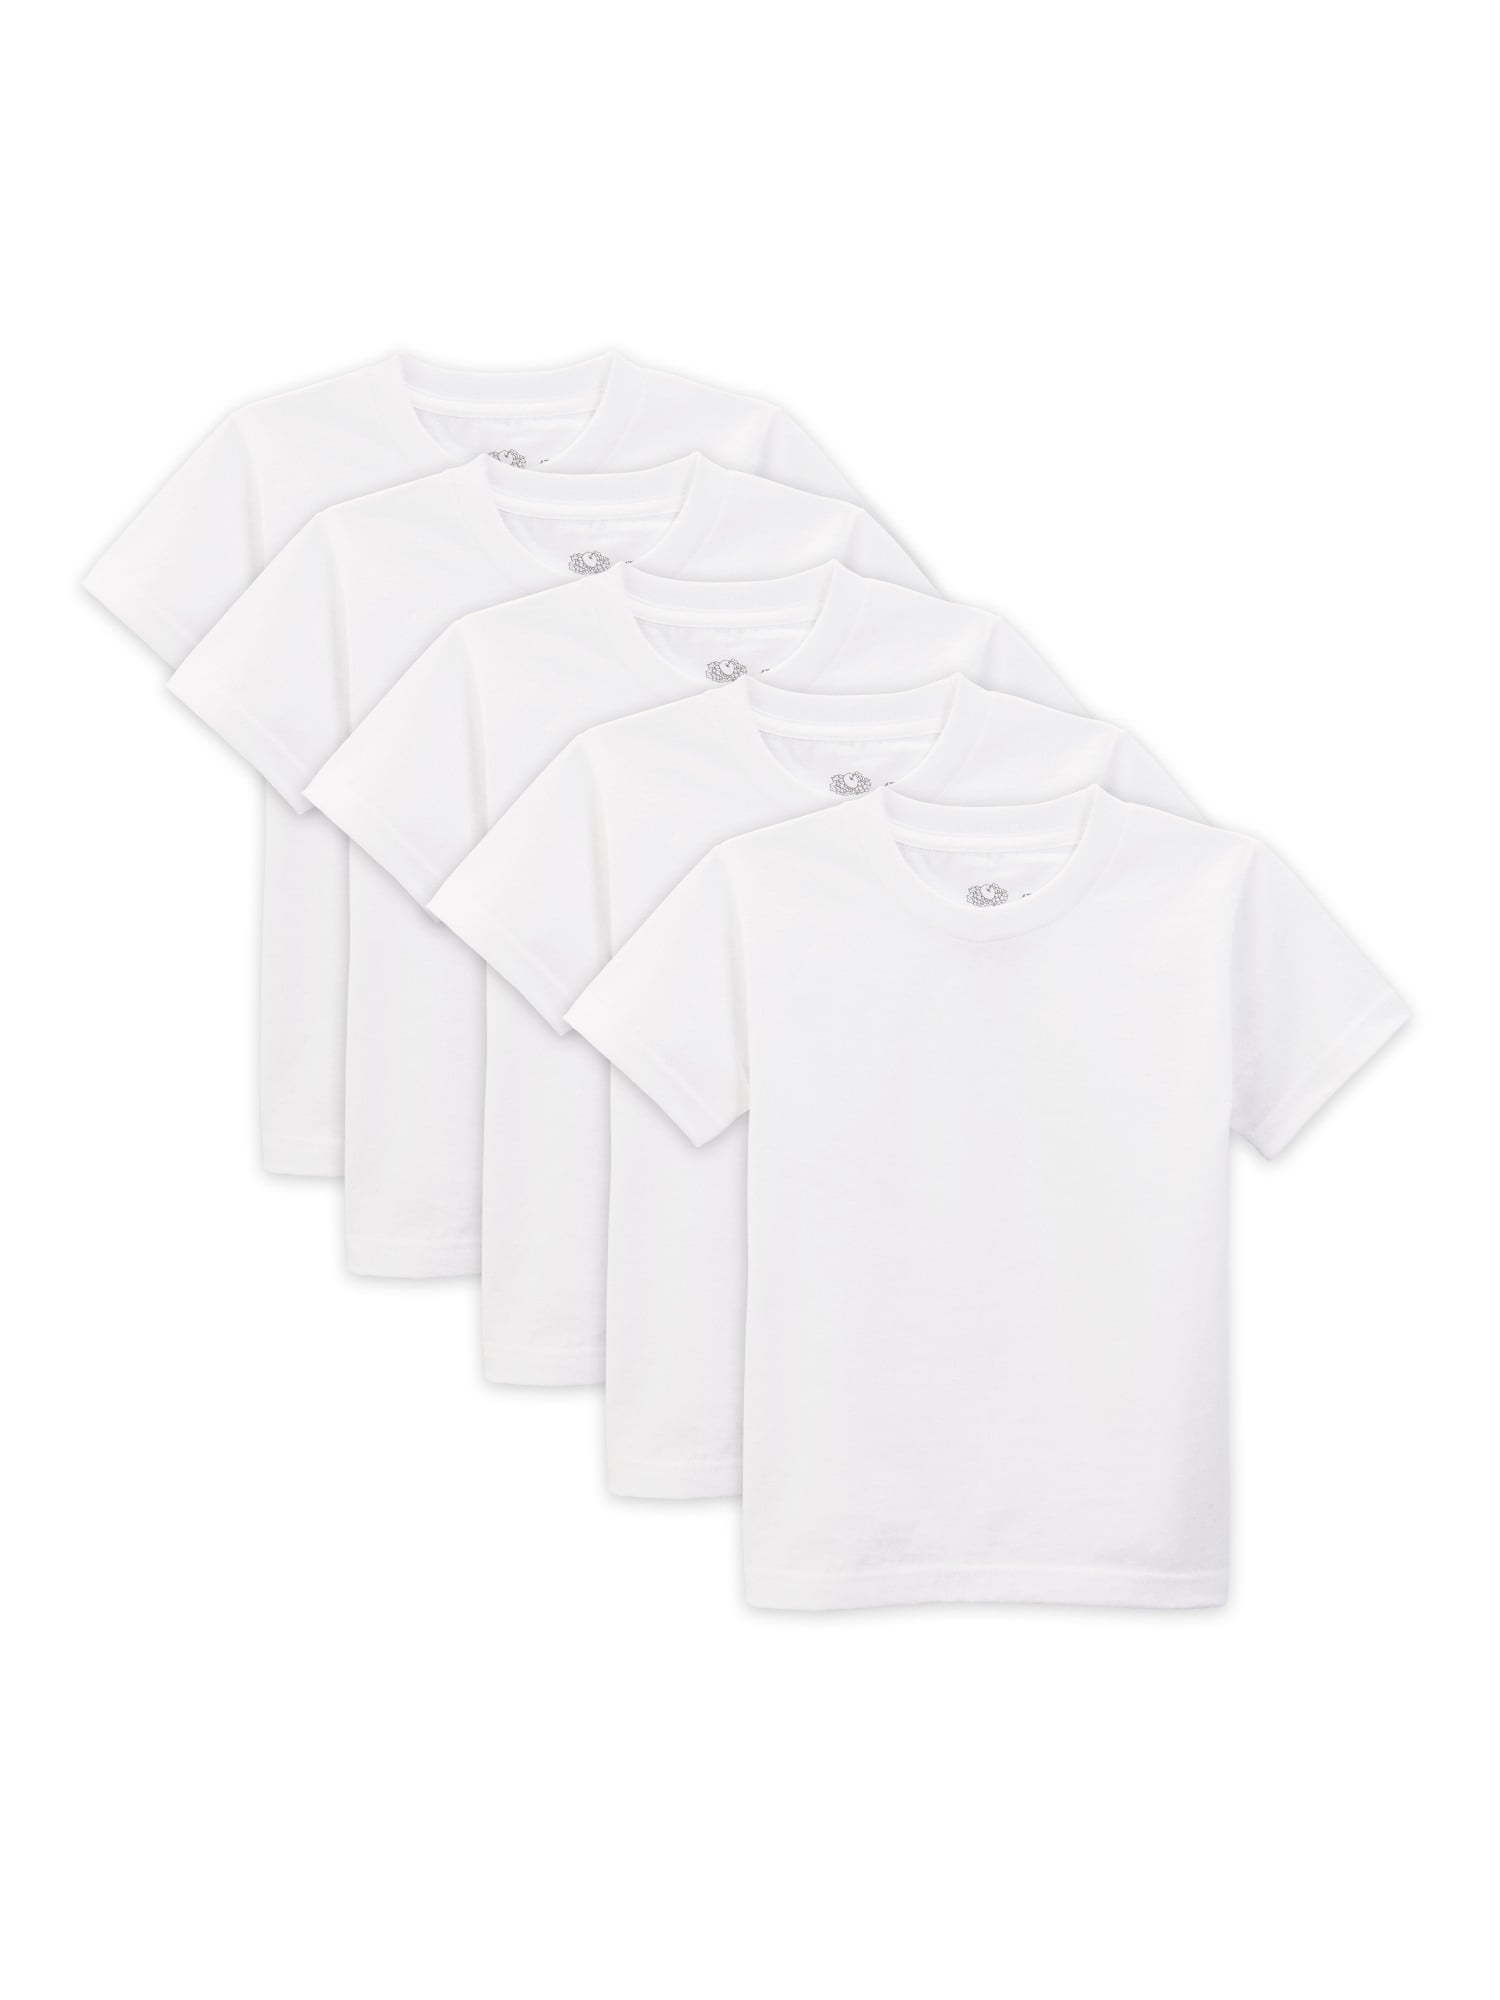 Fruit of the Loom Classic White Crew T-Shirts, 5-Pack (Toddler Boy ...